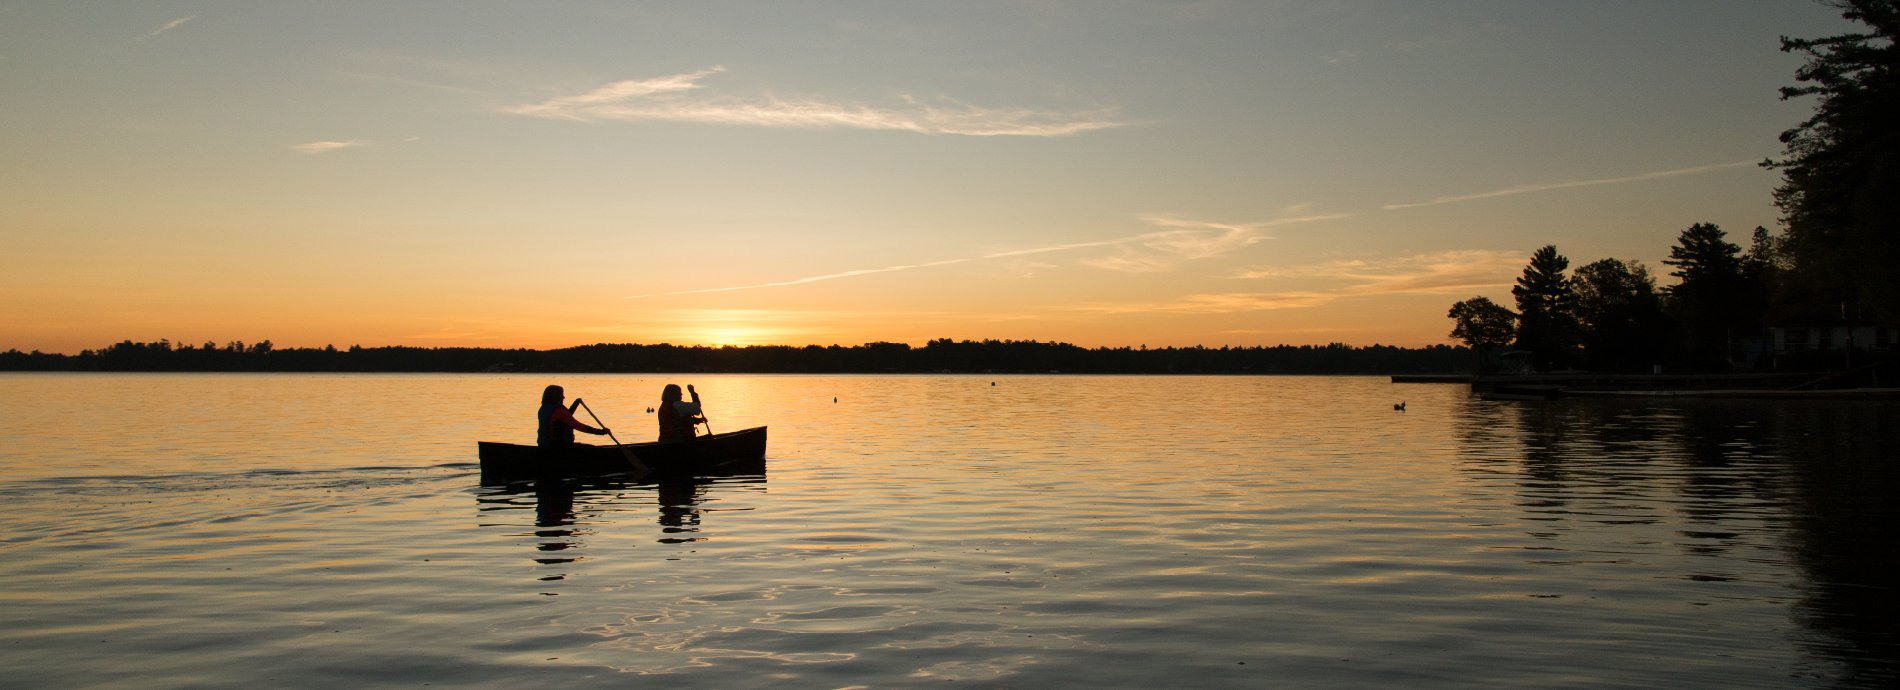 canoeing on a lake at sunset